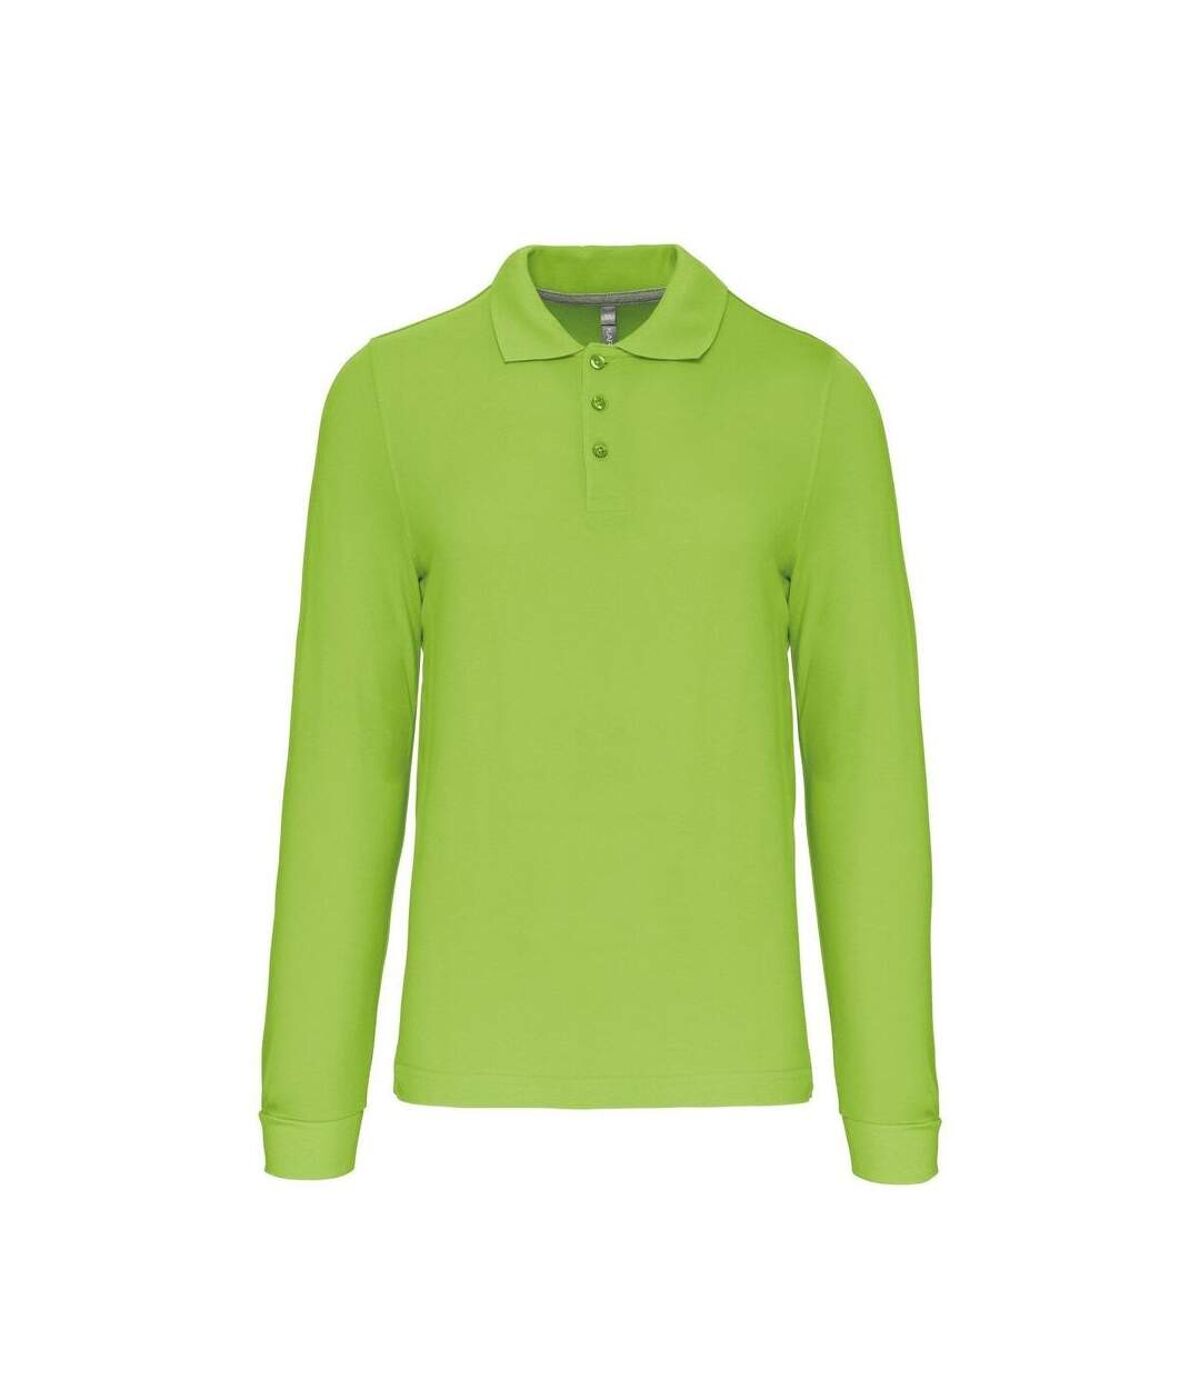 Polo manches longues - Homme - K243 - vert lime